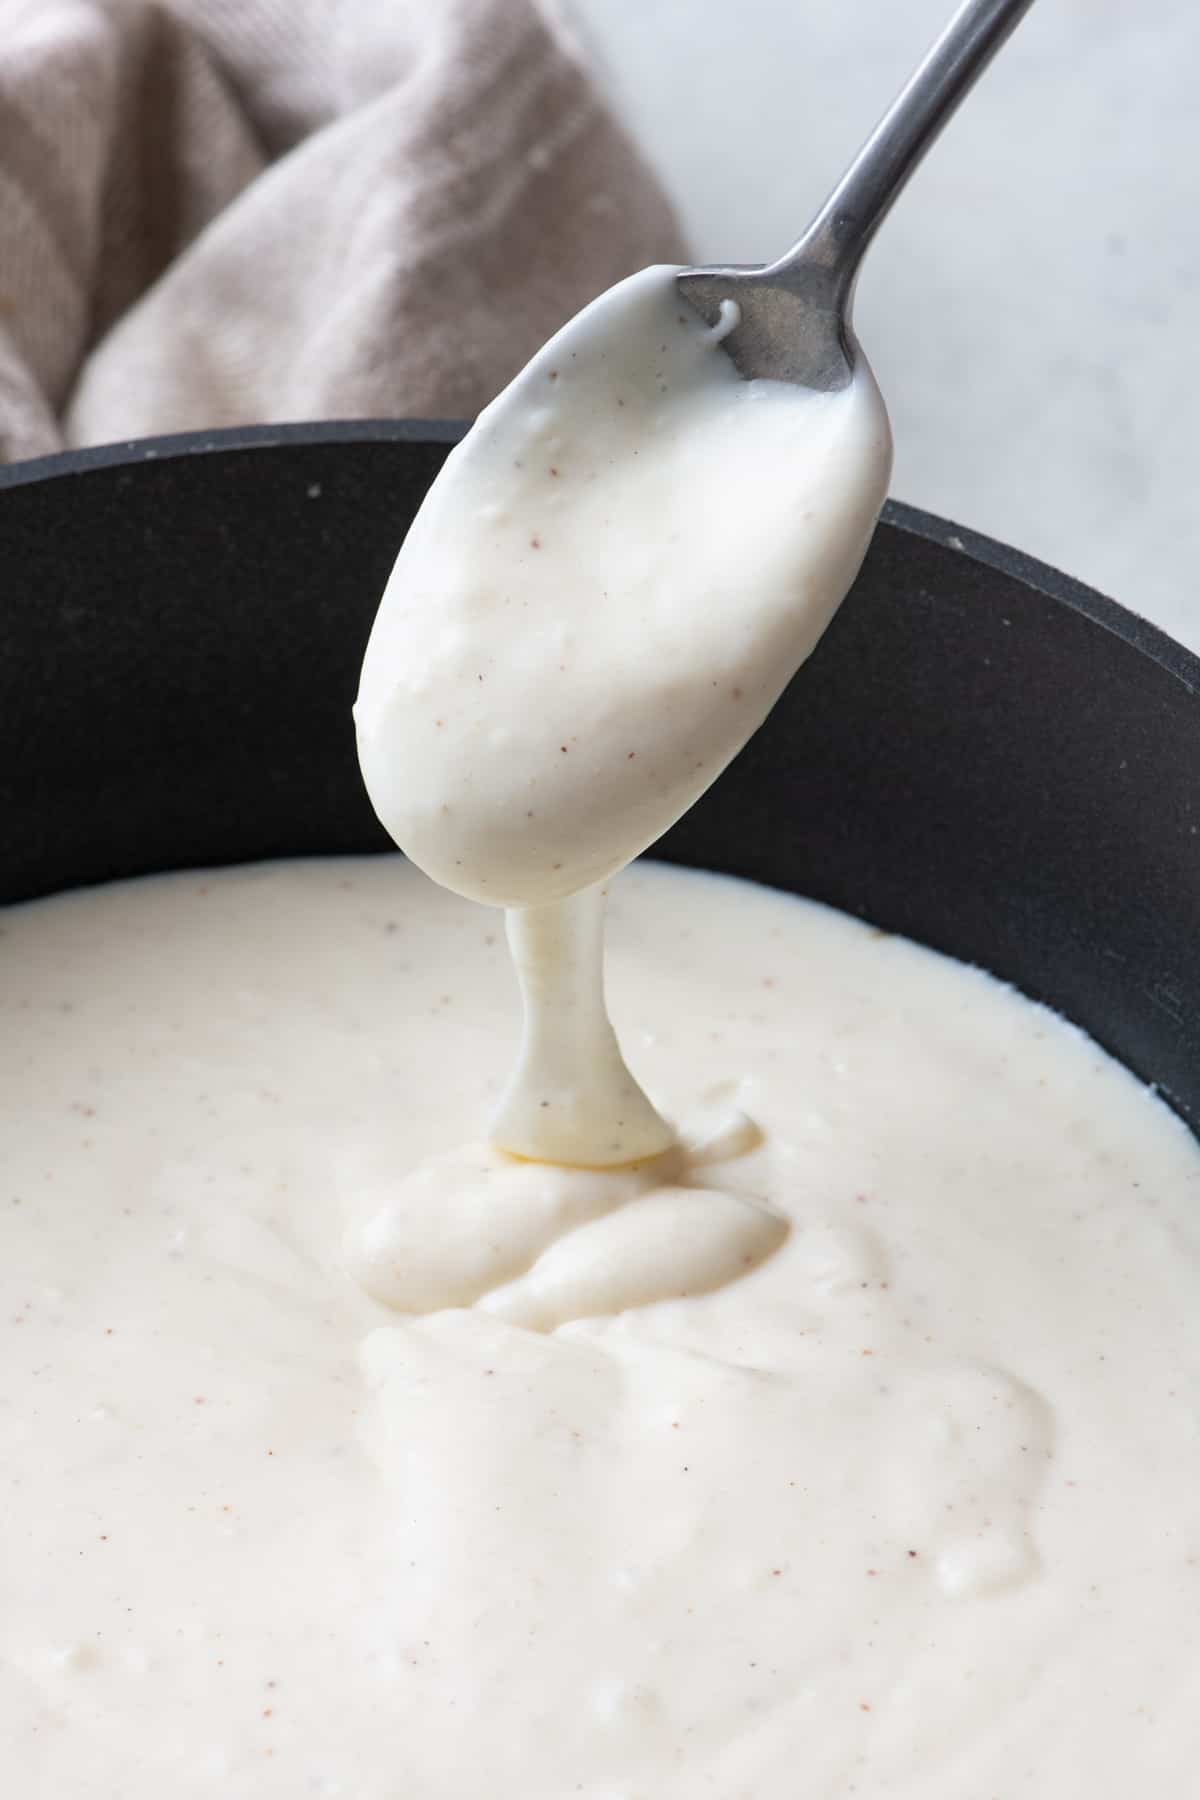 Spoon lifting up bechamel sauce as it drizzles back into pot to show thickened consistency.